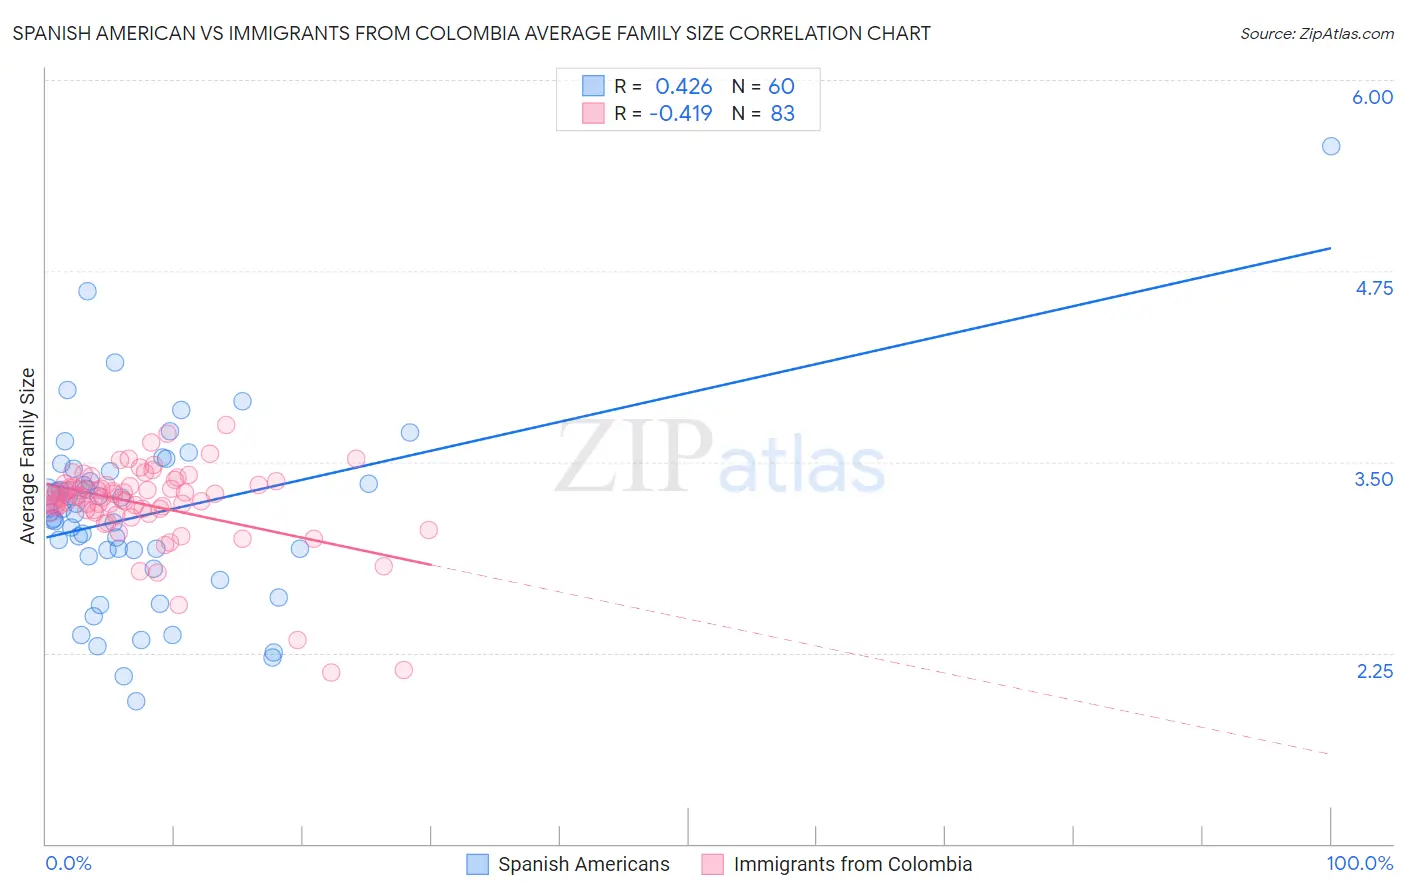 Spanish American vs Immigrants from Colombia Average Family Size